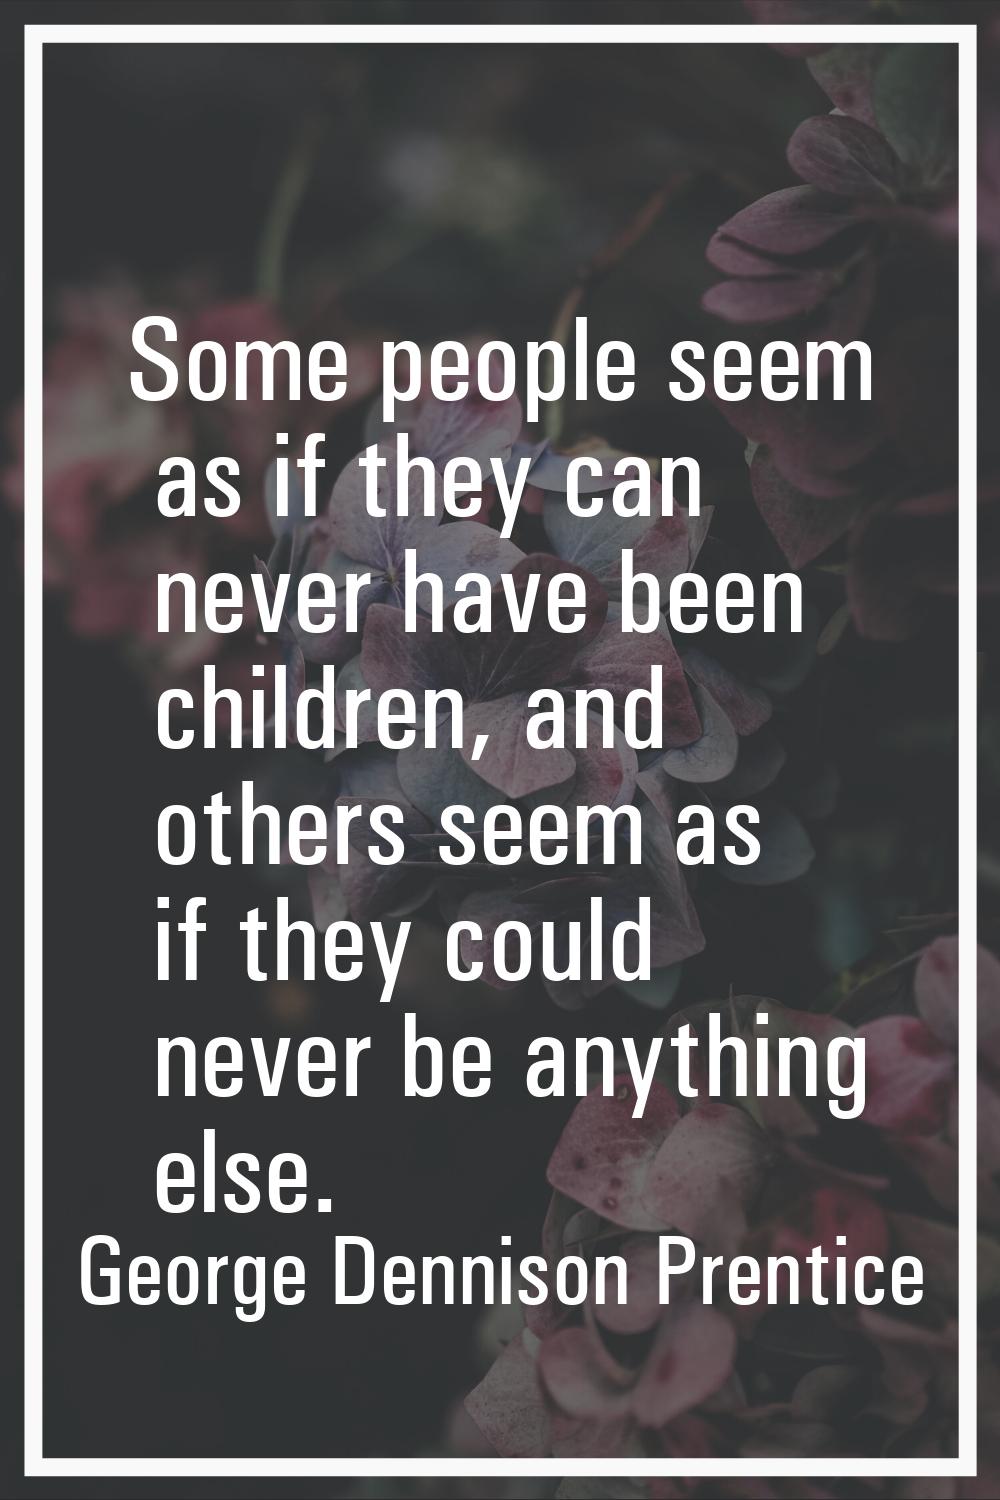 Some people seem as if they can never have been children, and others seem as if they could never be